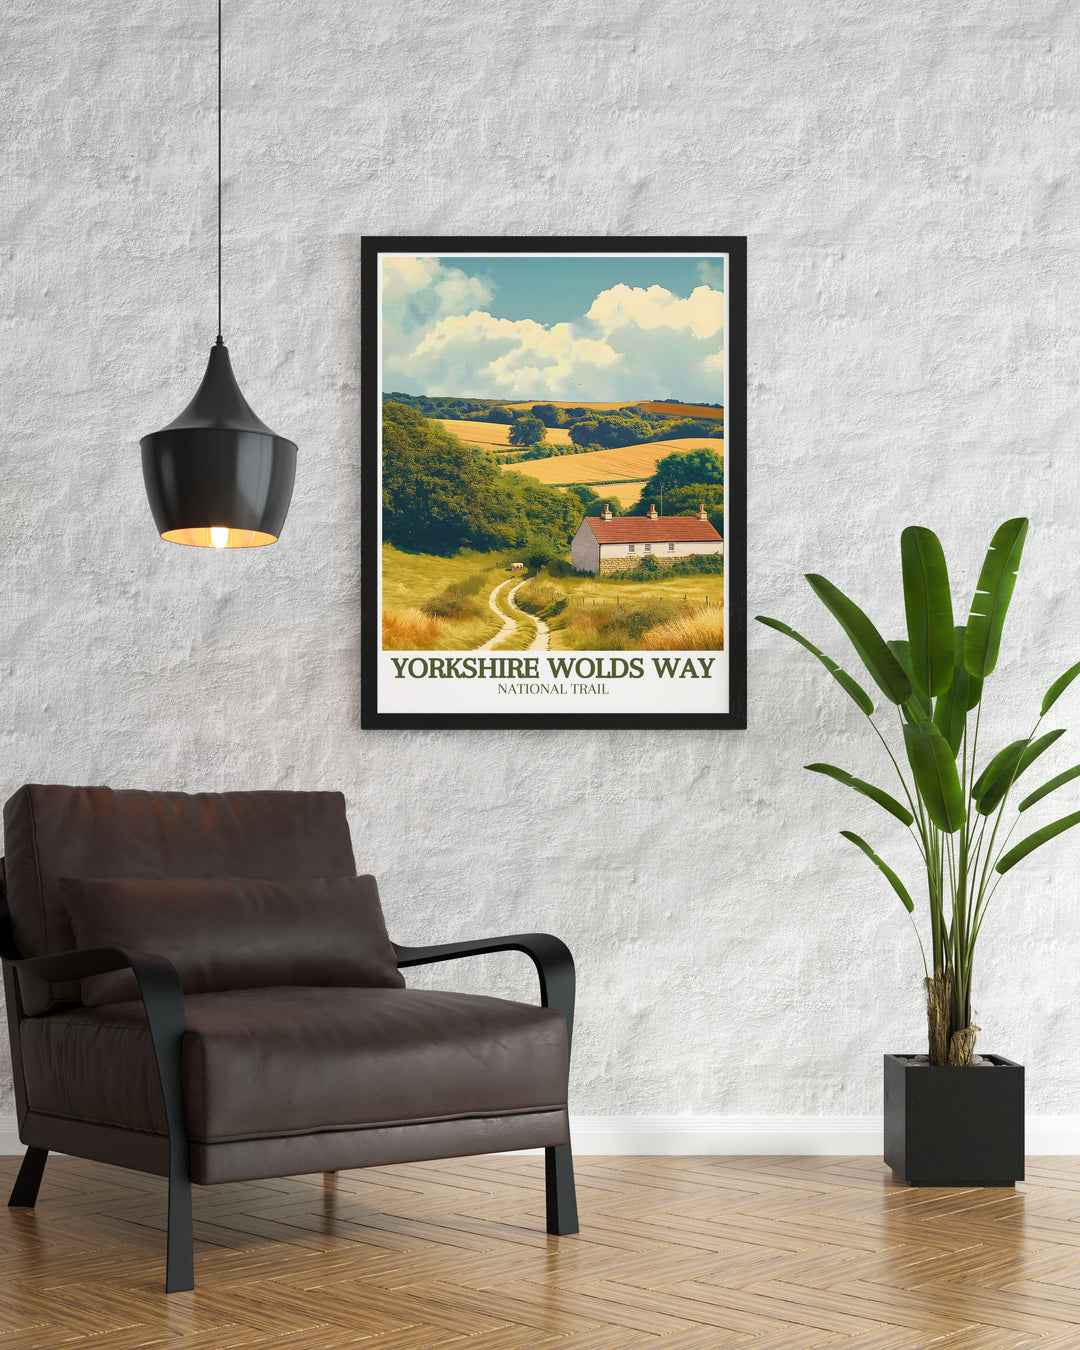 Fine art print of the Yorkshire Wolds Way, showcasing the trails serene beauty and diverse landscapes. The artwork captures the essence of the UKs national trails, from the rolling hills and ancient woodlands to the vibrant meadows, making it a beautiful addition to any home decor.